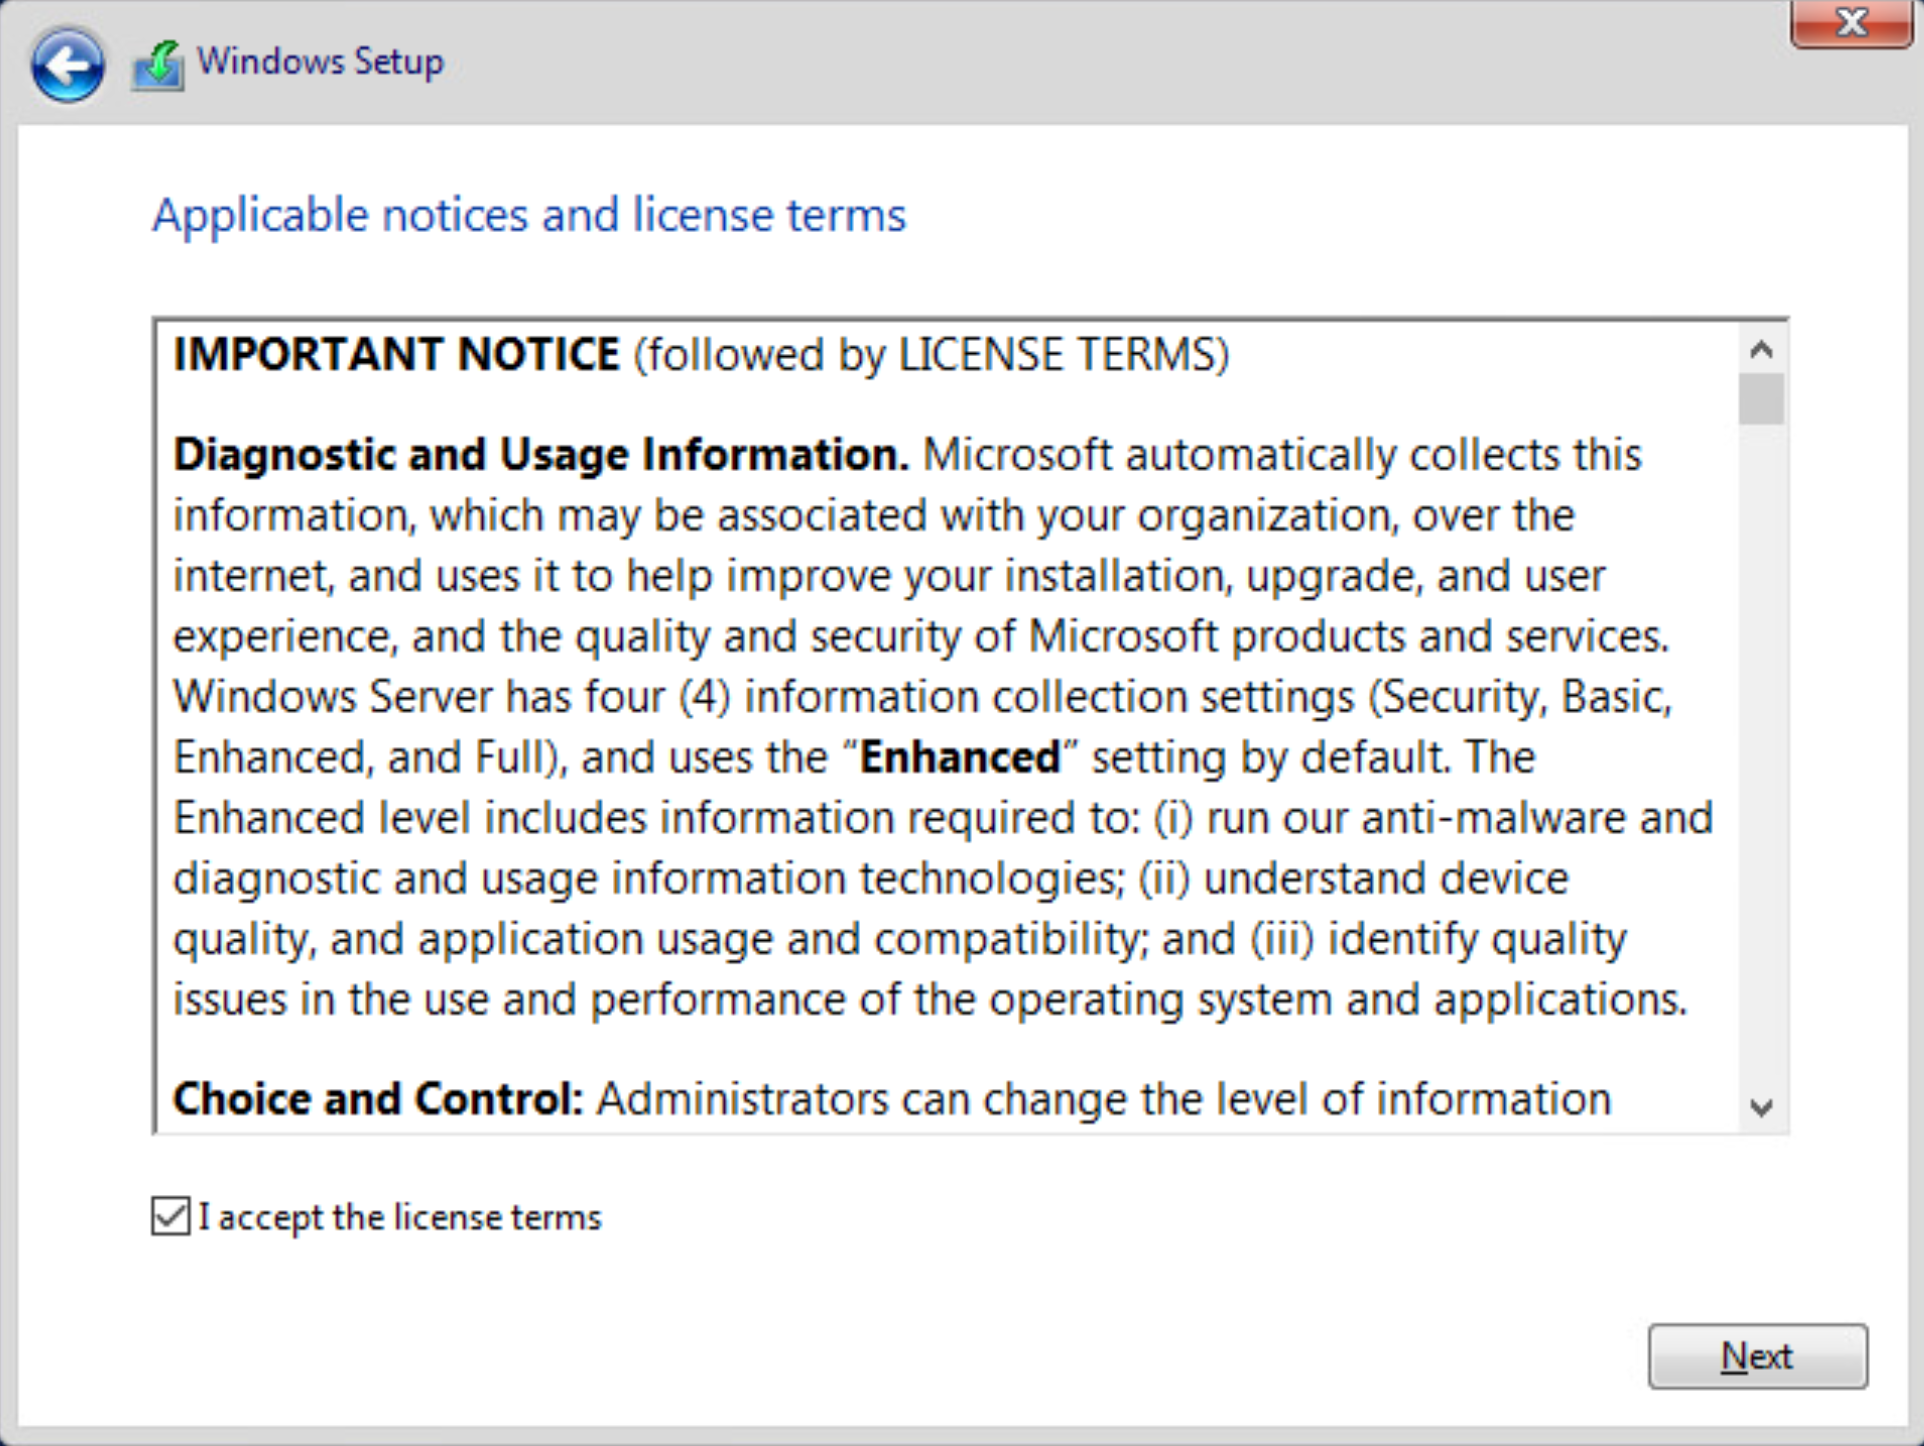 Screenshot of Windows Setup window displaying Applicable notices and license terms.